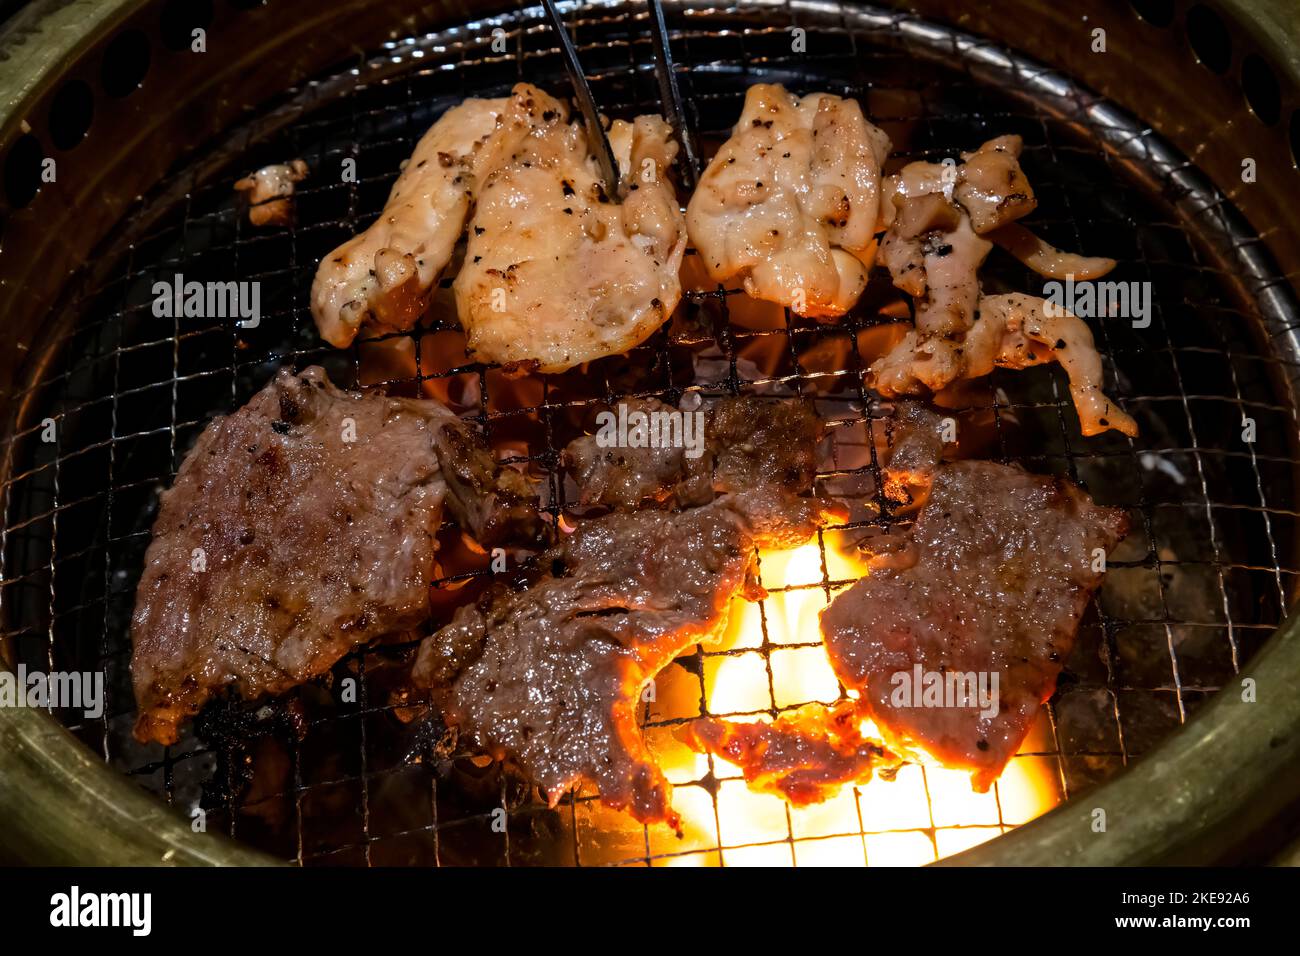 Korean BBQ restaurant, grilling Chicken and Beef. Stock Photo